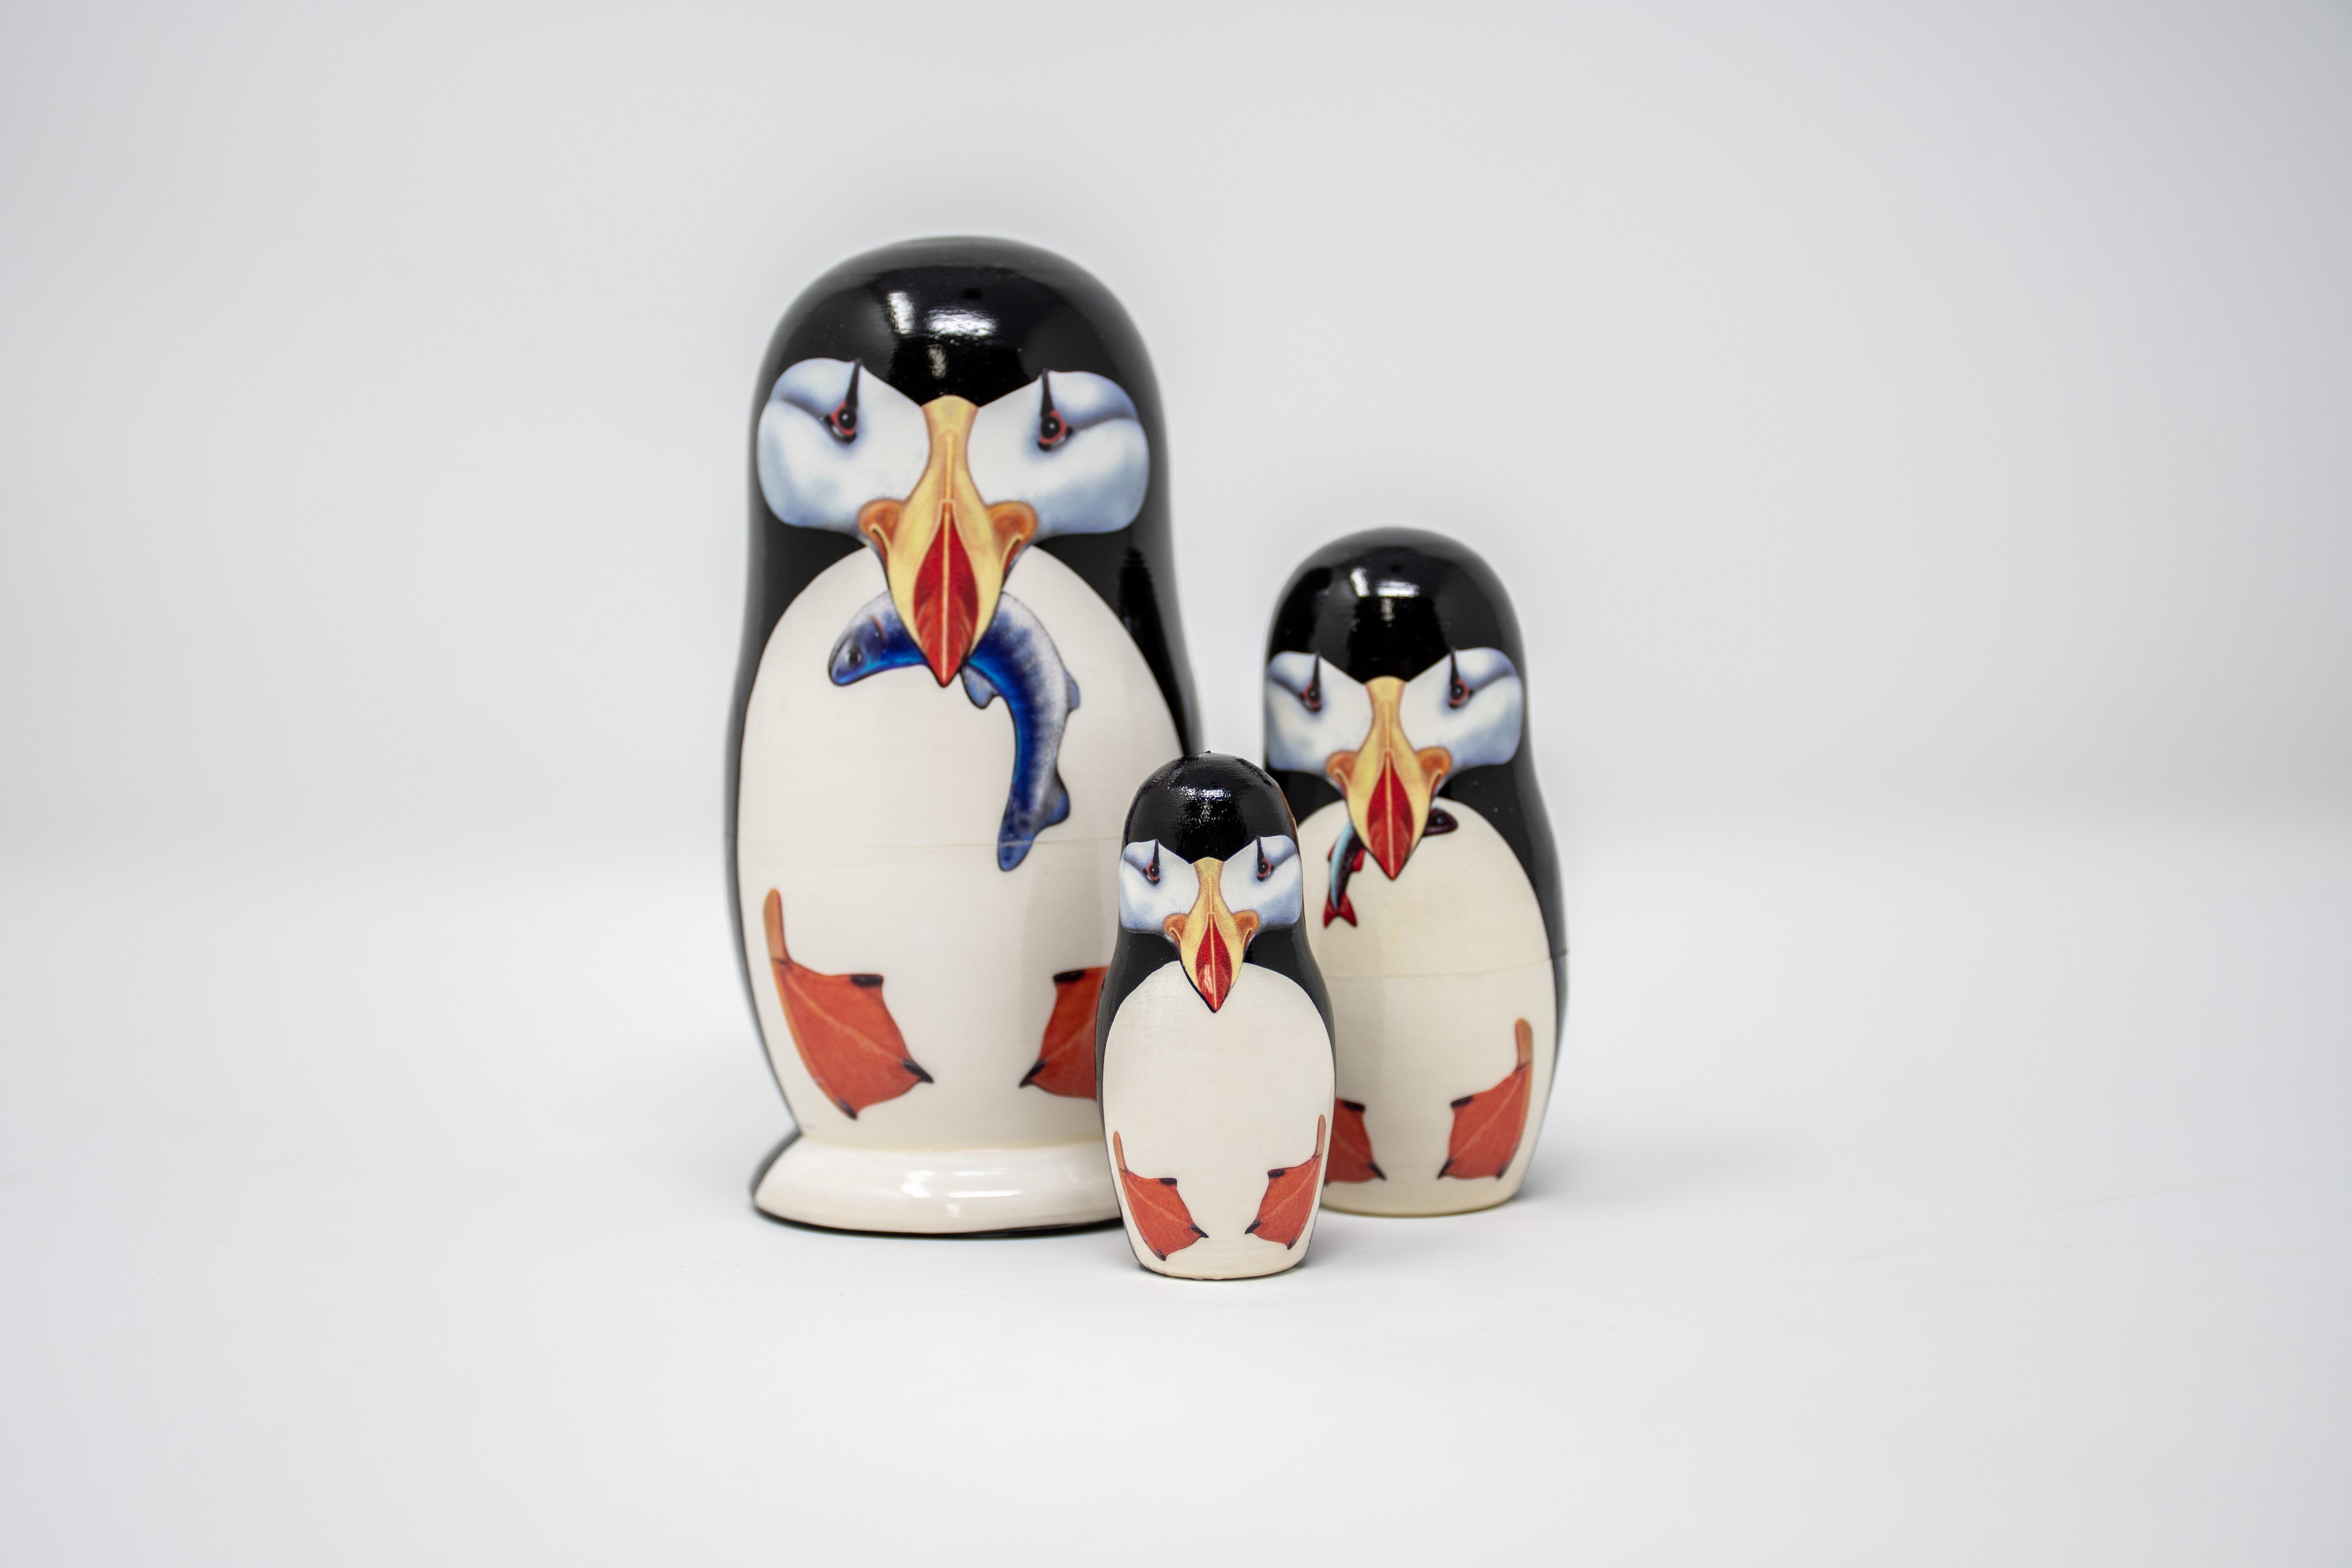  Small Russian Doll Puffin